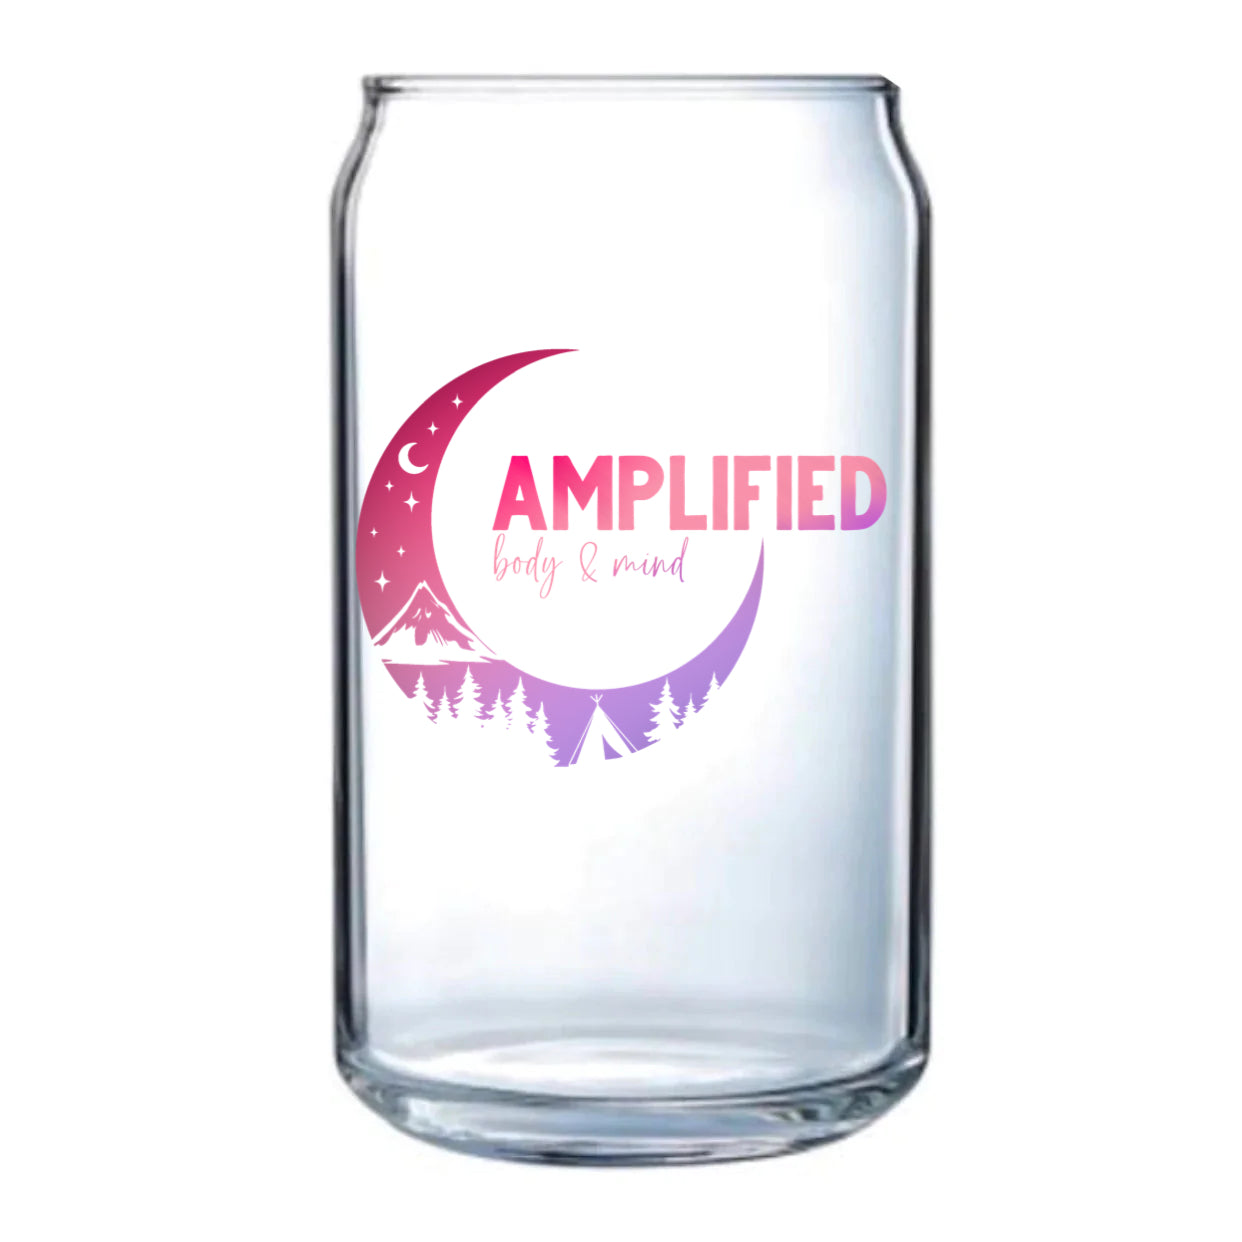 AMPLIFIED CAN GLASS